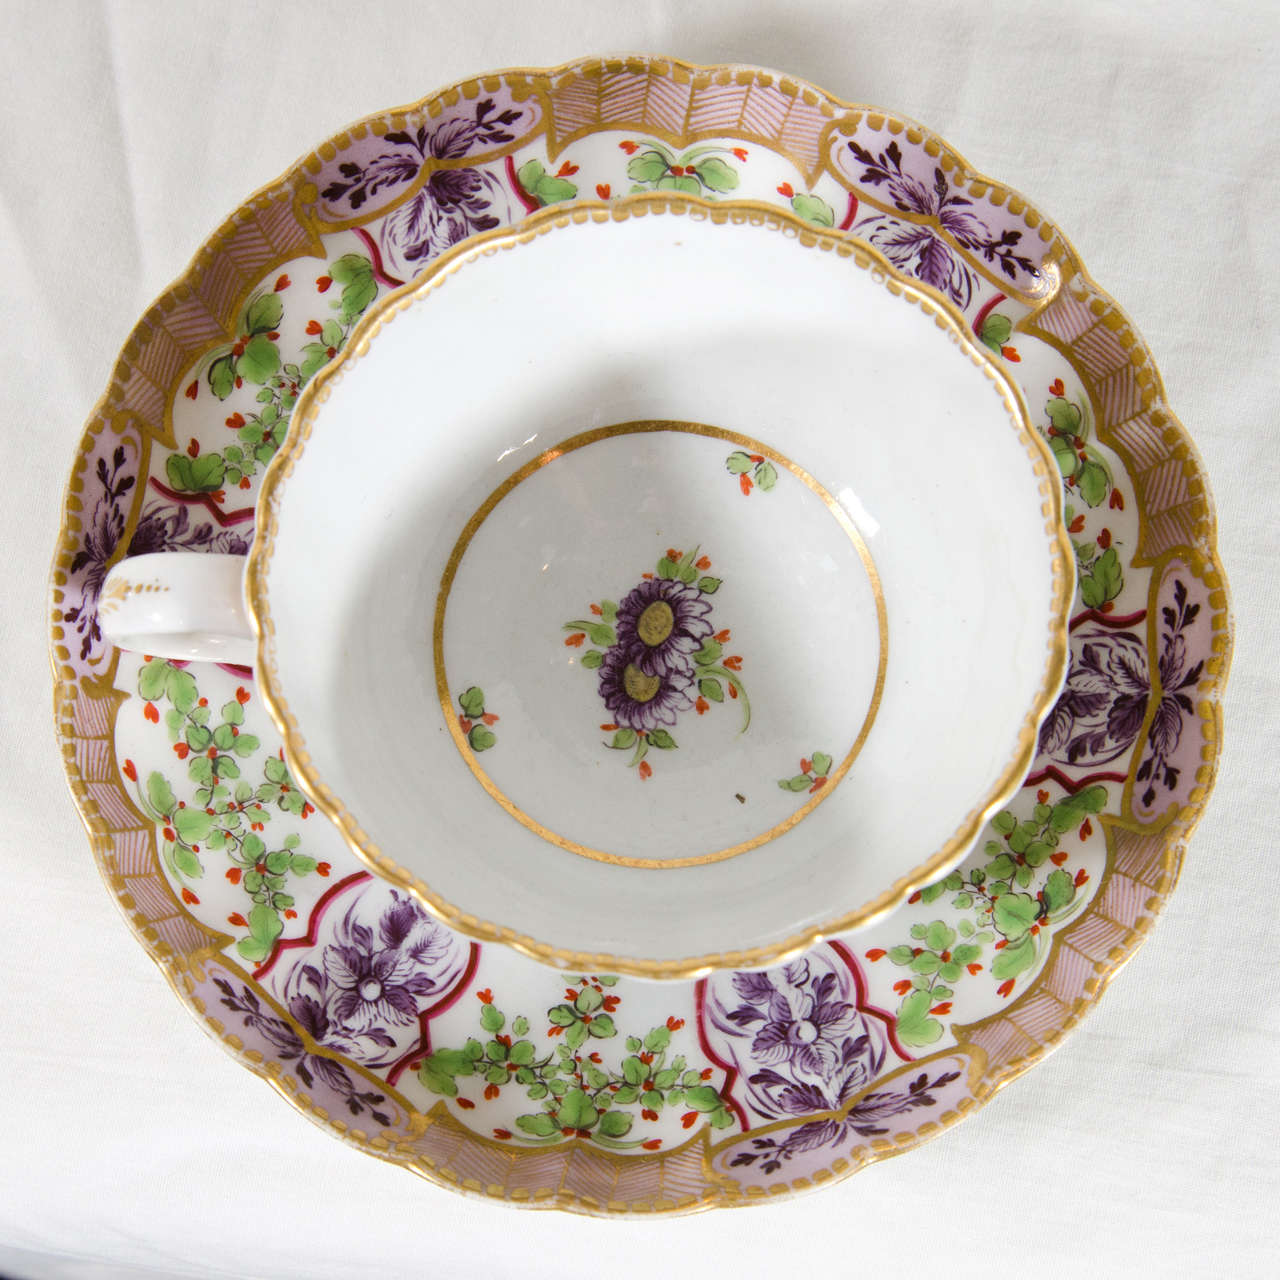 Antique Flight Barr Worcester Porcelain Cup and Saucer in Holly Berry Pattern 1